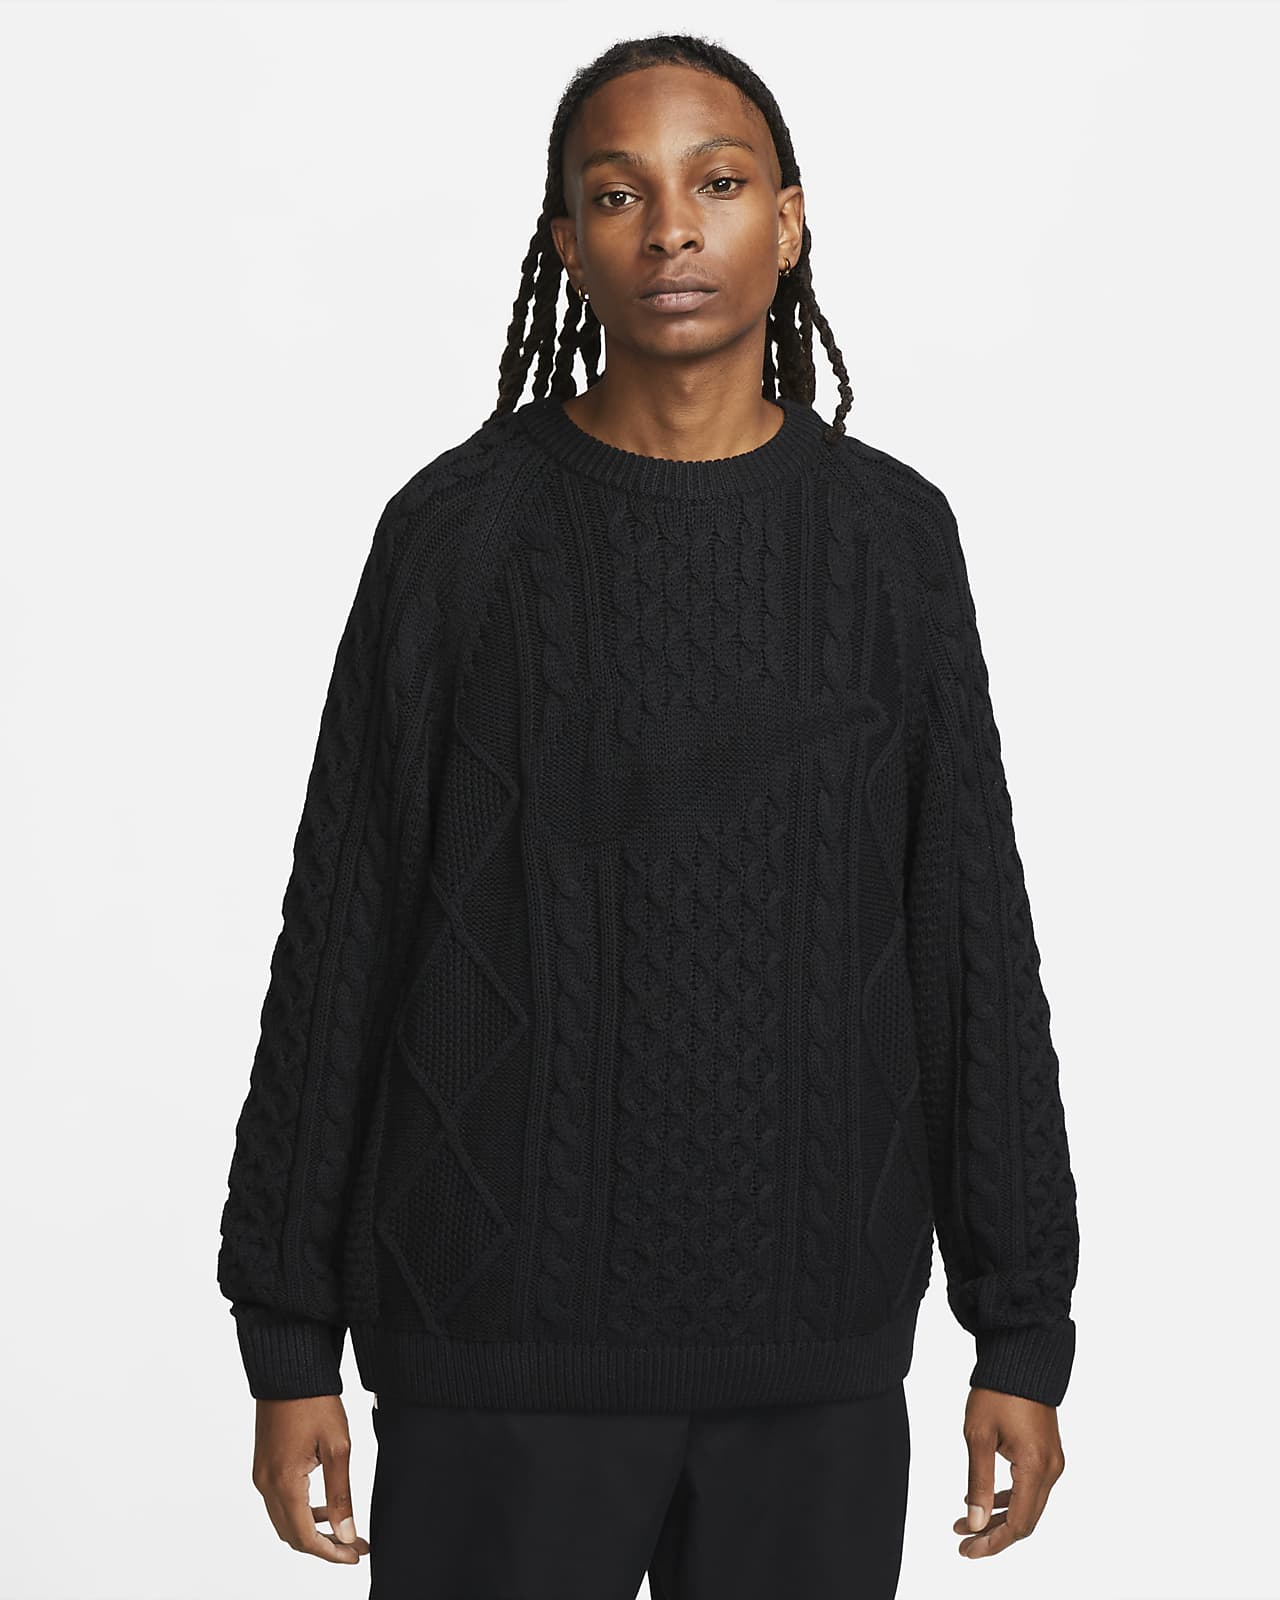 Nike Life Men's Cable-Knit Jumper